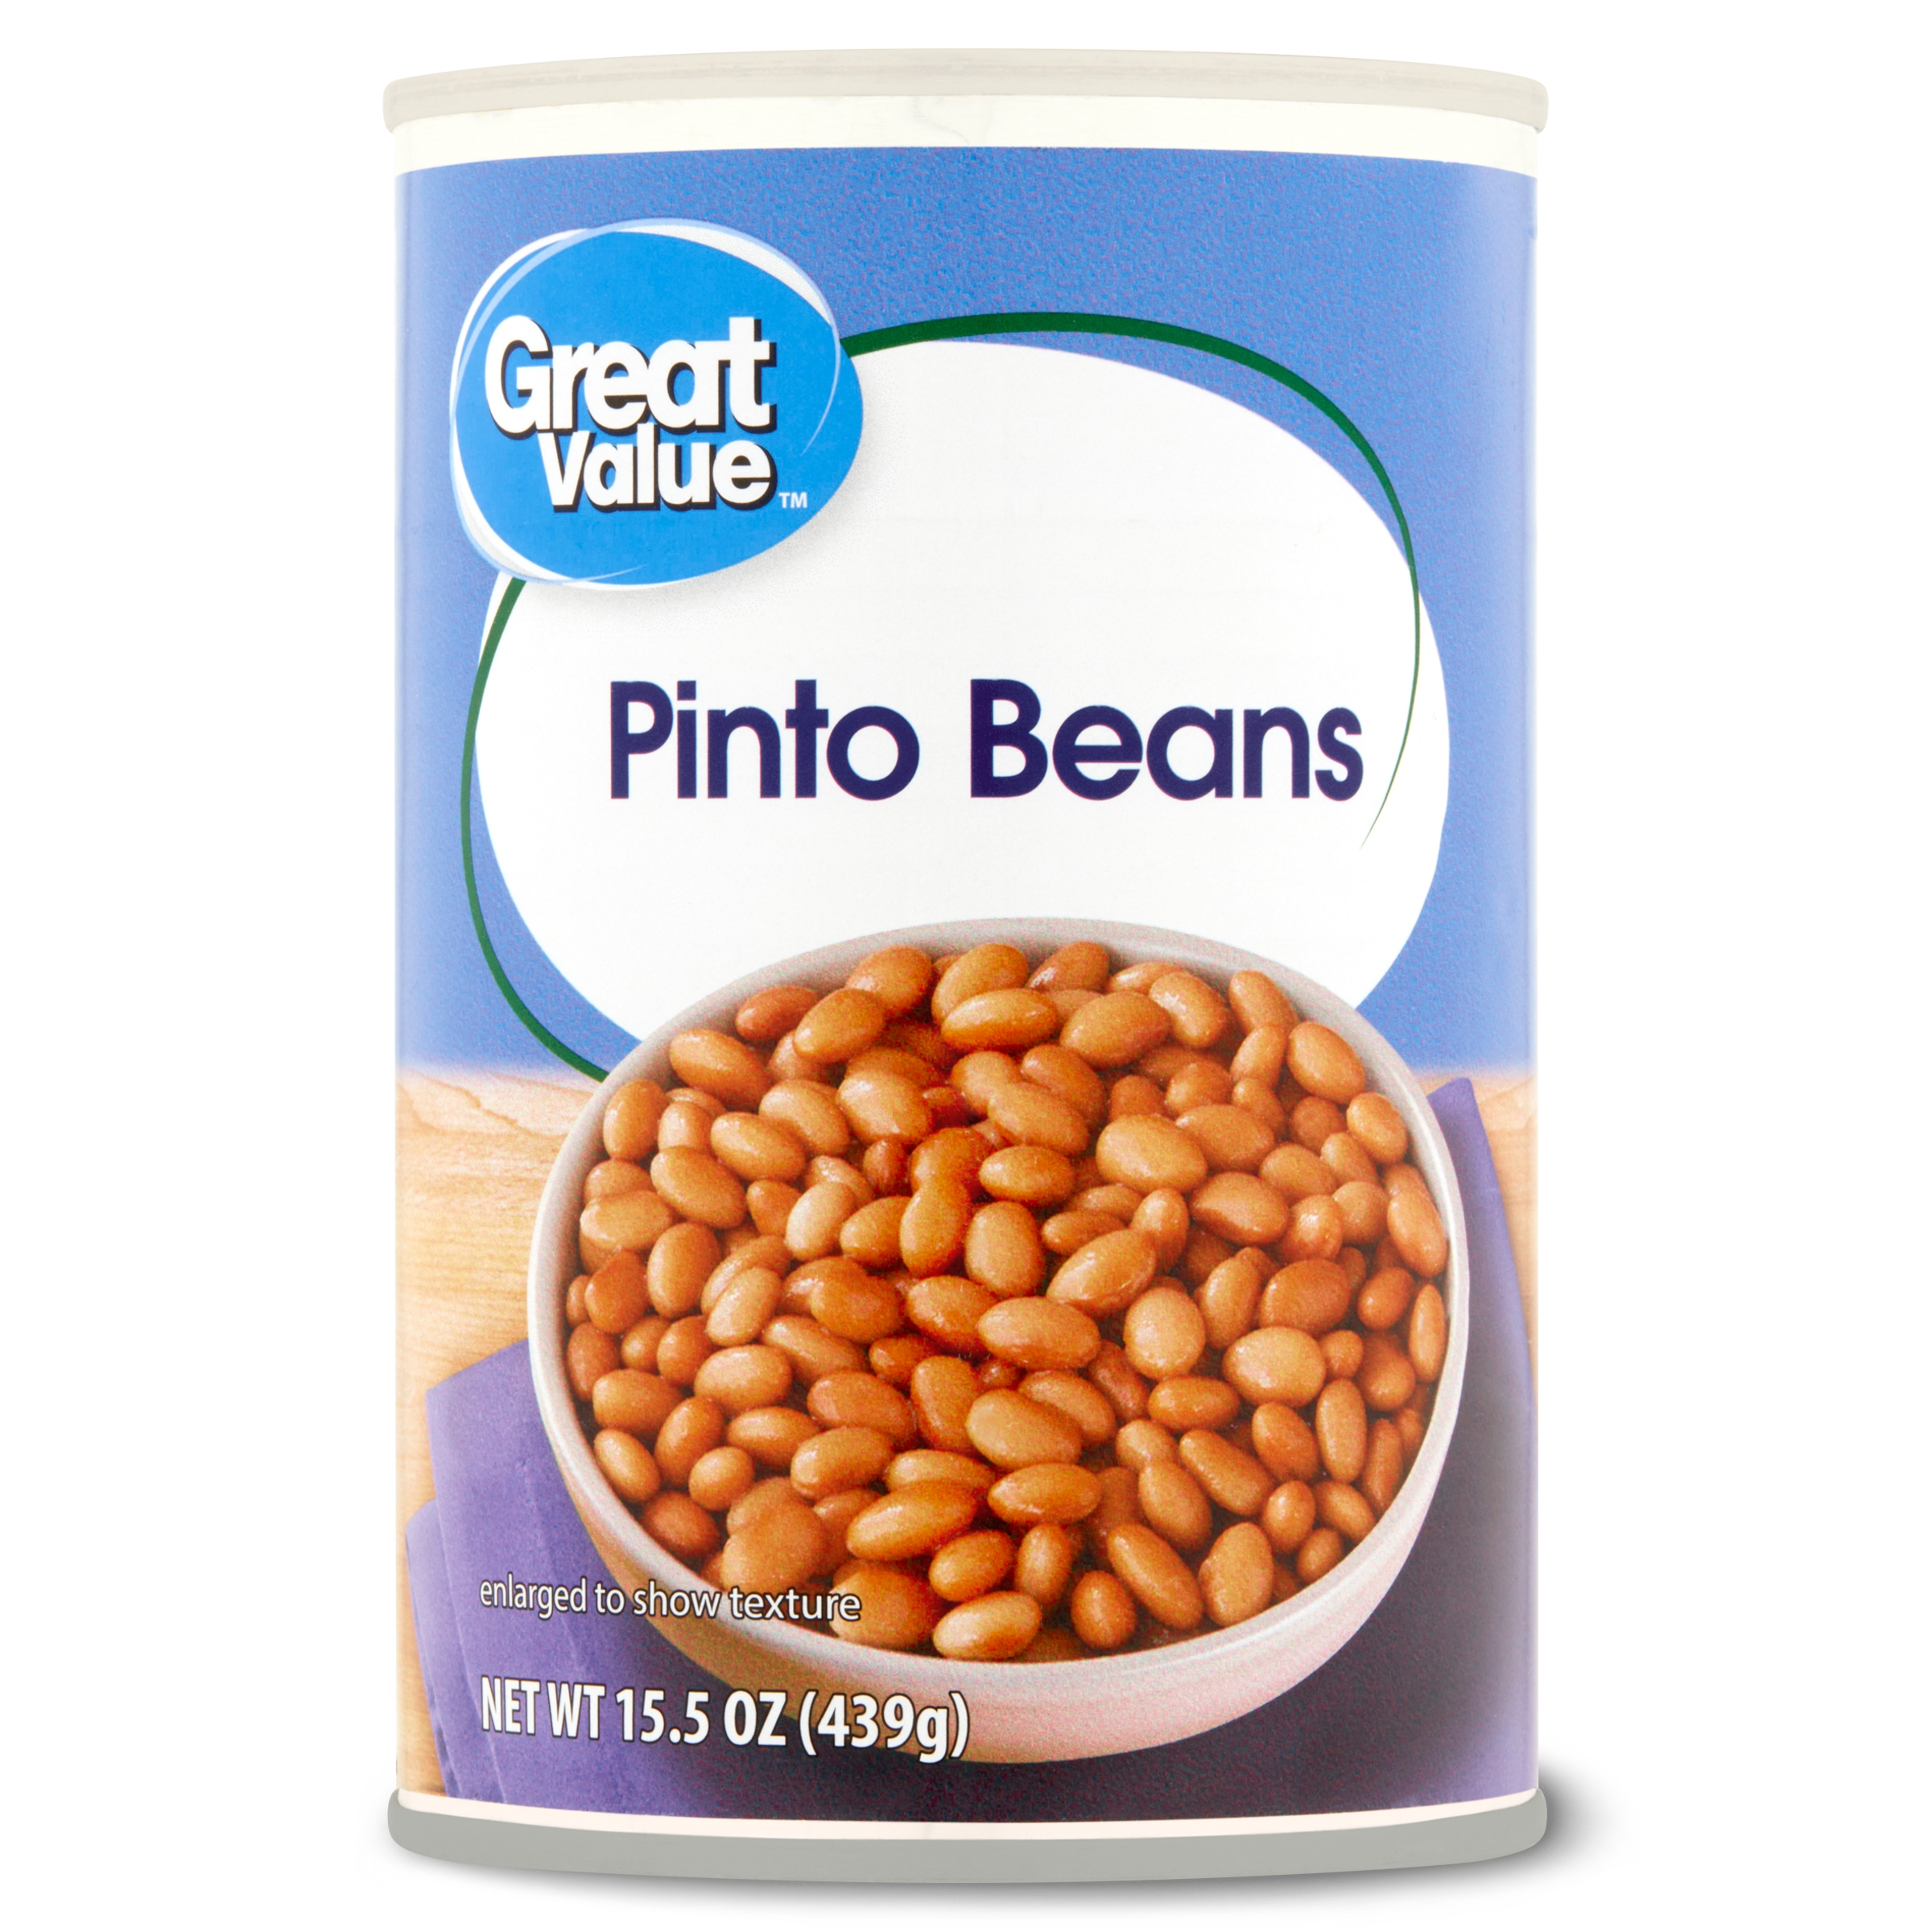 Great Value Pinto Beans, 15.5 oz Can - image 1 of 8